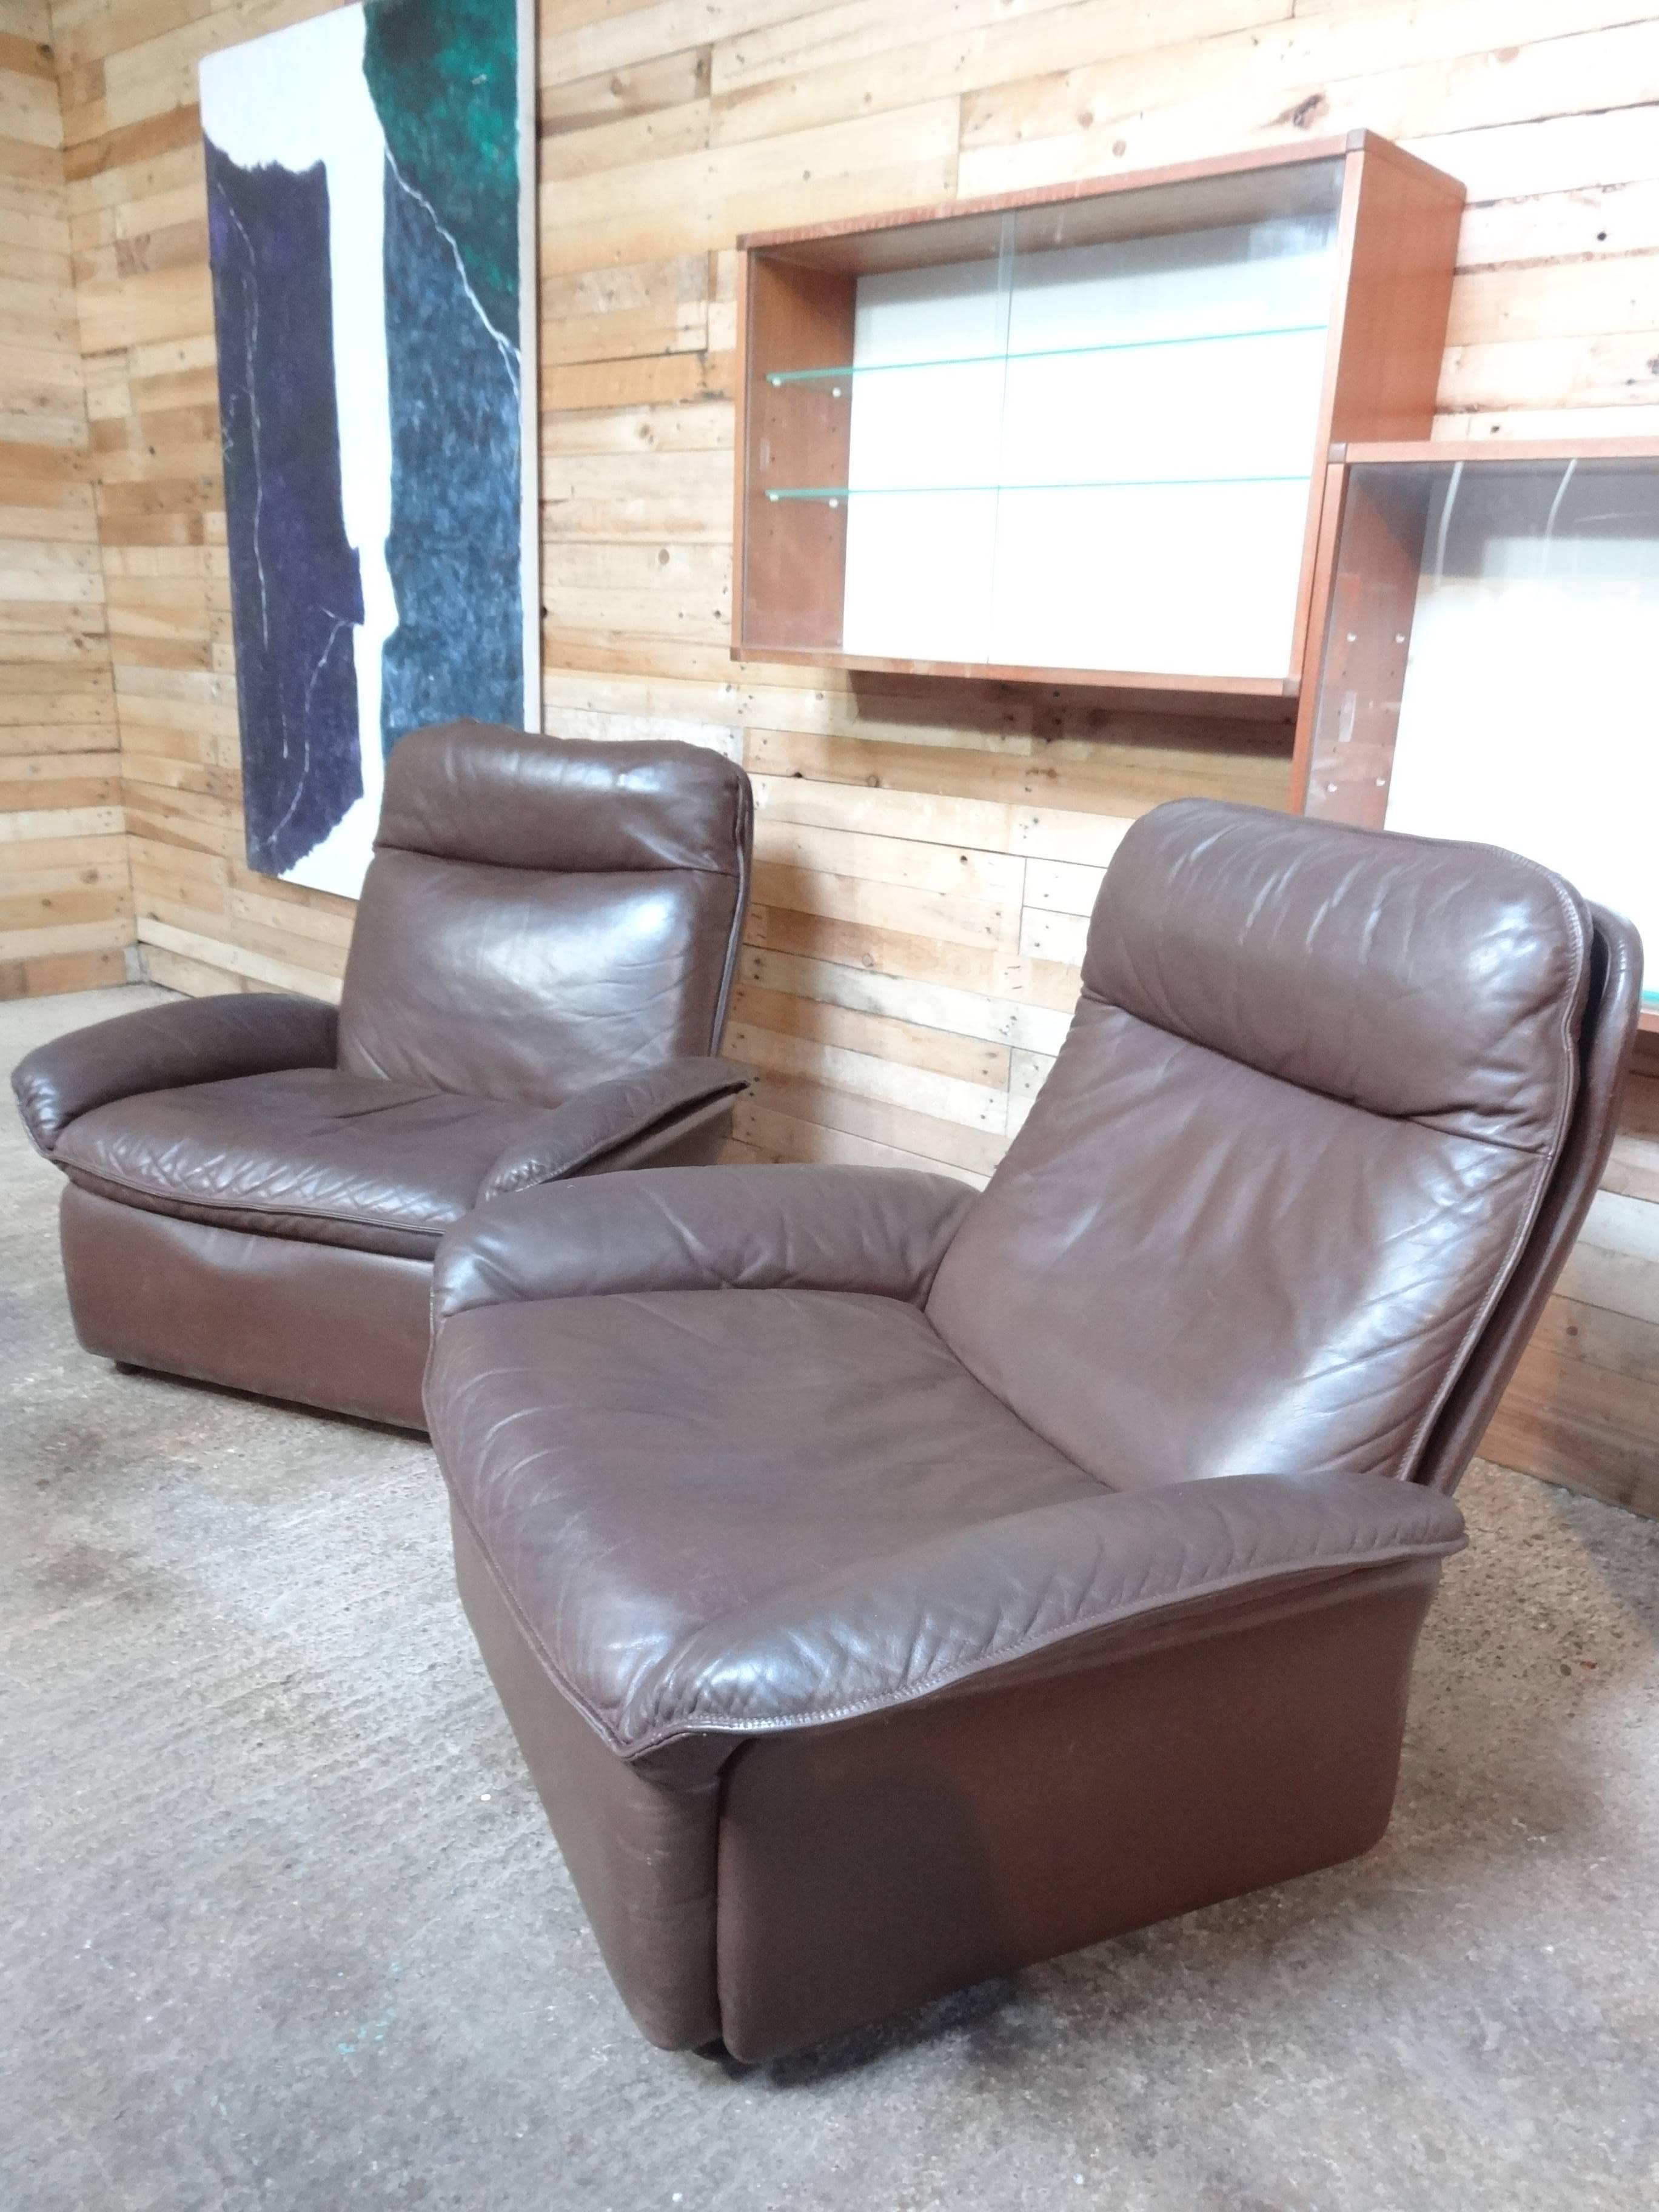 Super unusual set of stylish cognac coloured armchairs made by De Sede furniture makers, lovely organic shape, leather has lovely patina, the set is in good vintage condition. Price is per chair, we currently have two chairs available, please